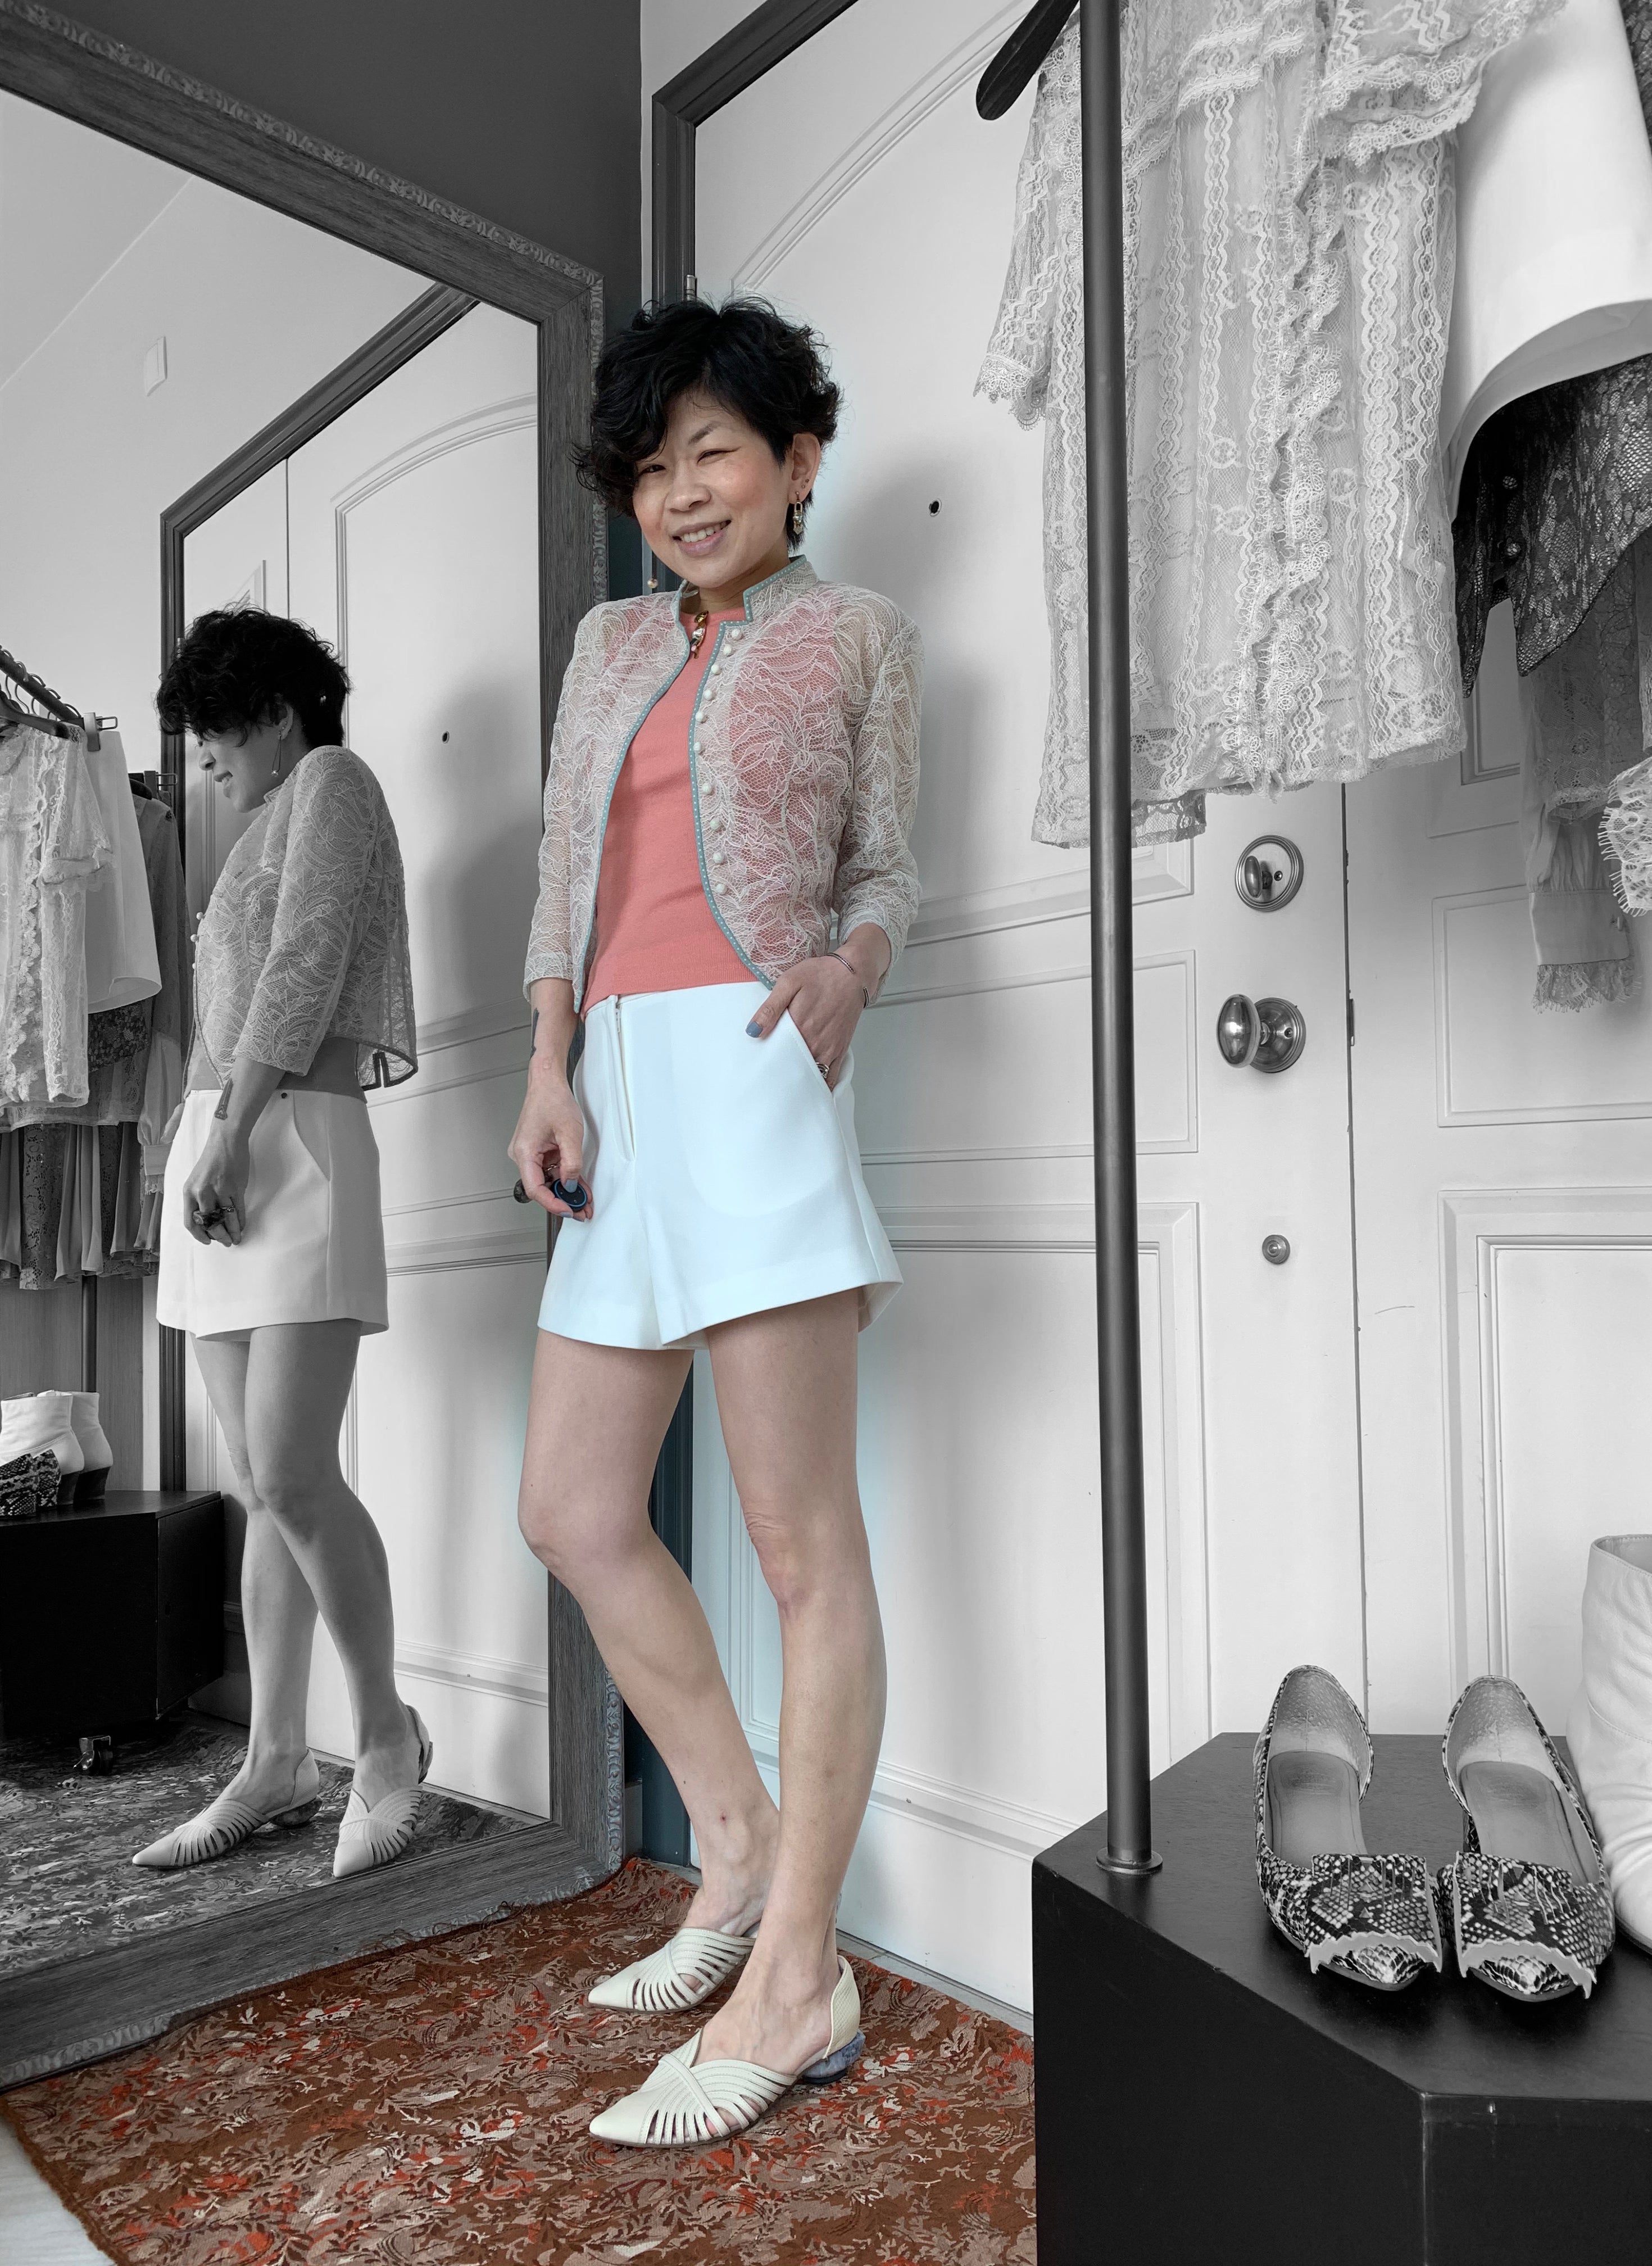 Stand Collar Pastel Green x Cream Lace Jacket